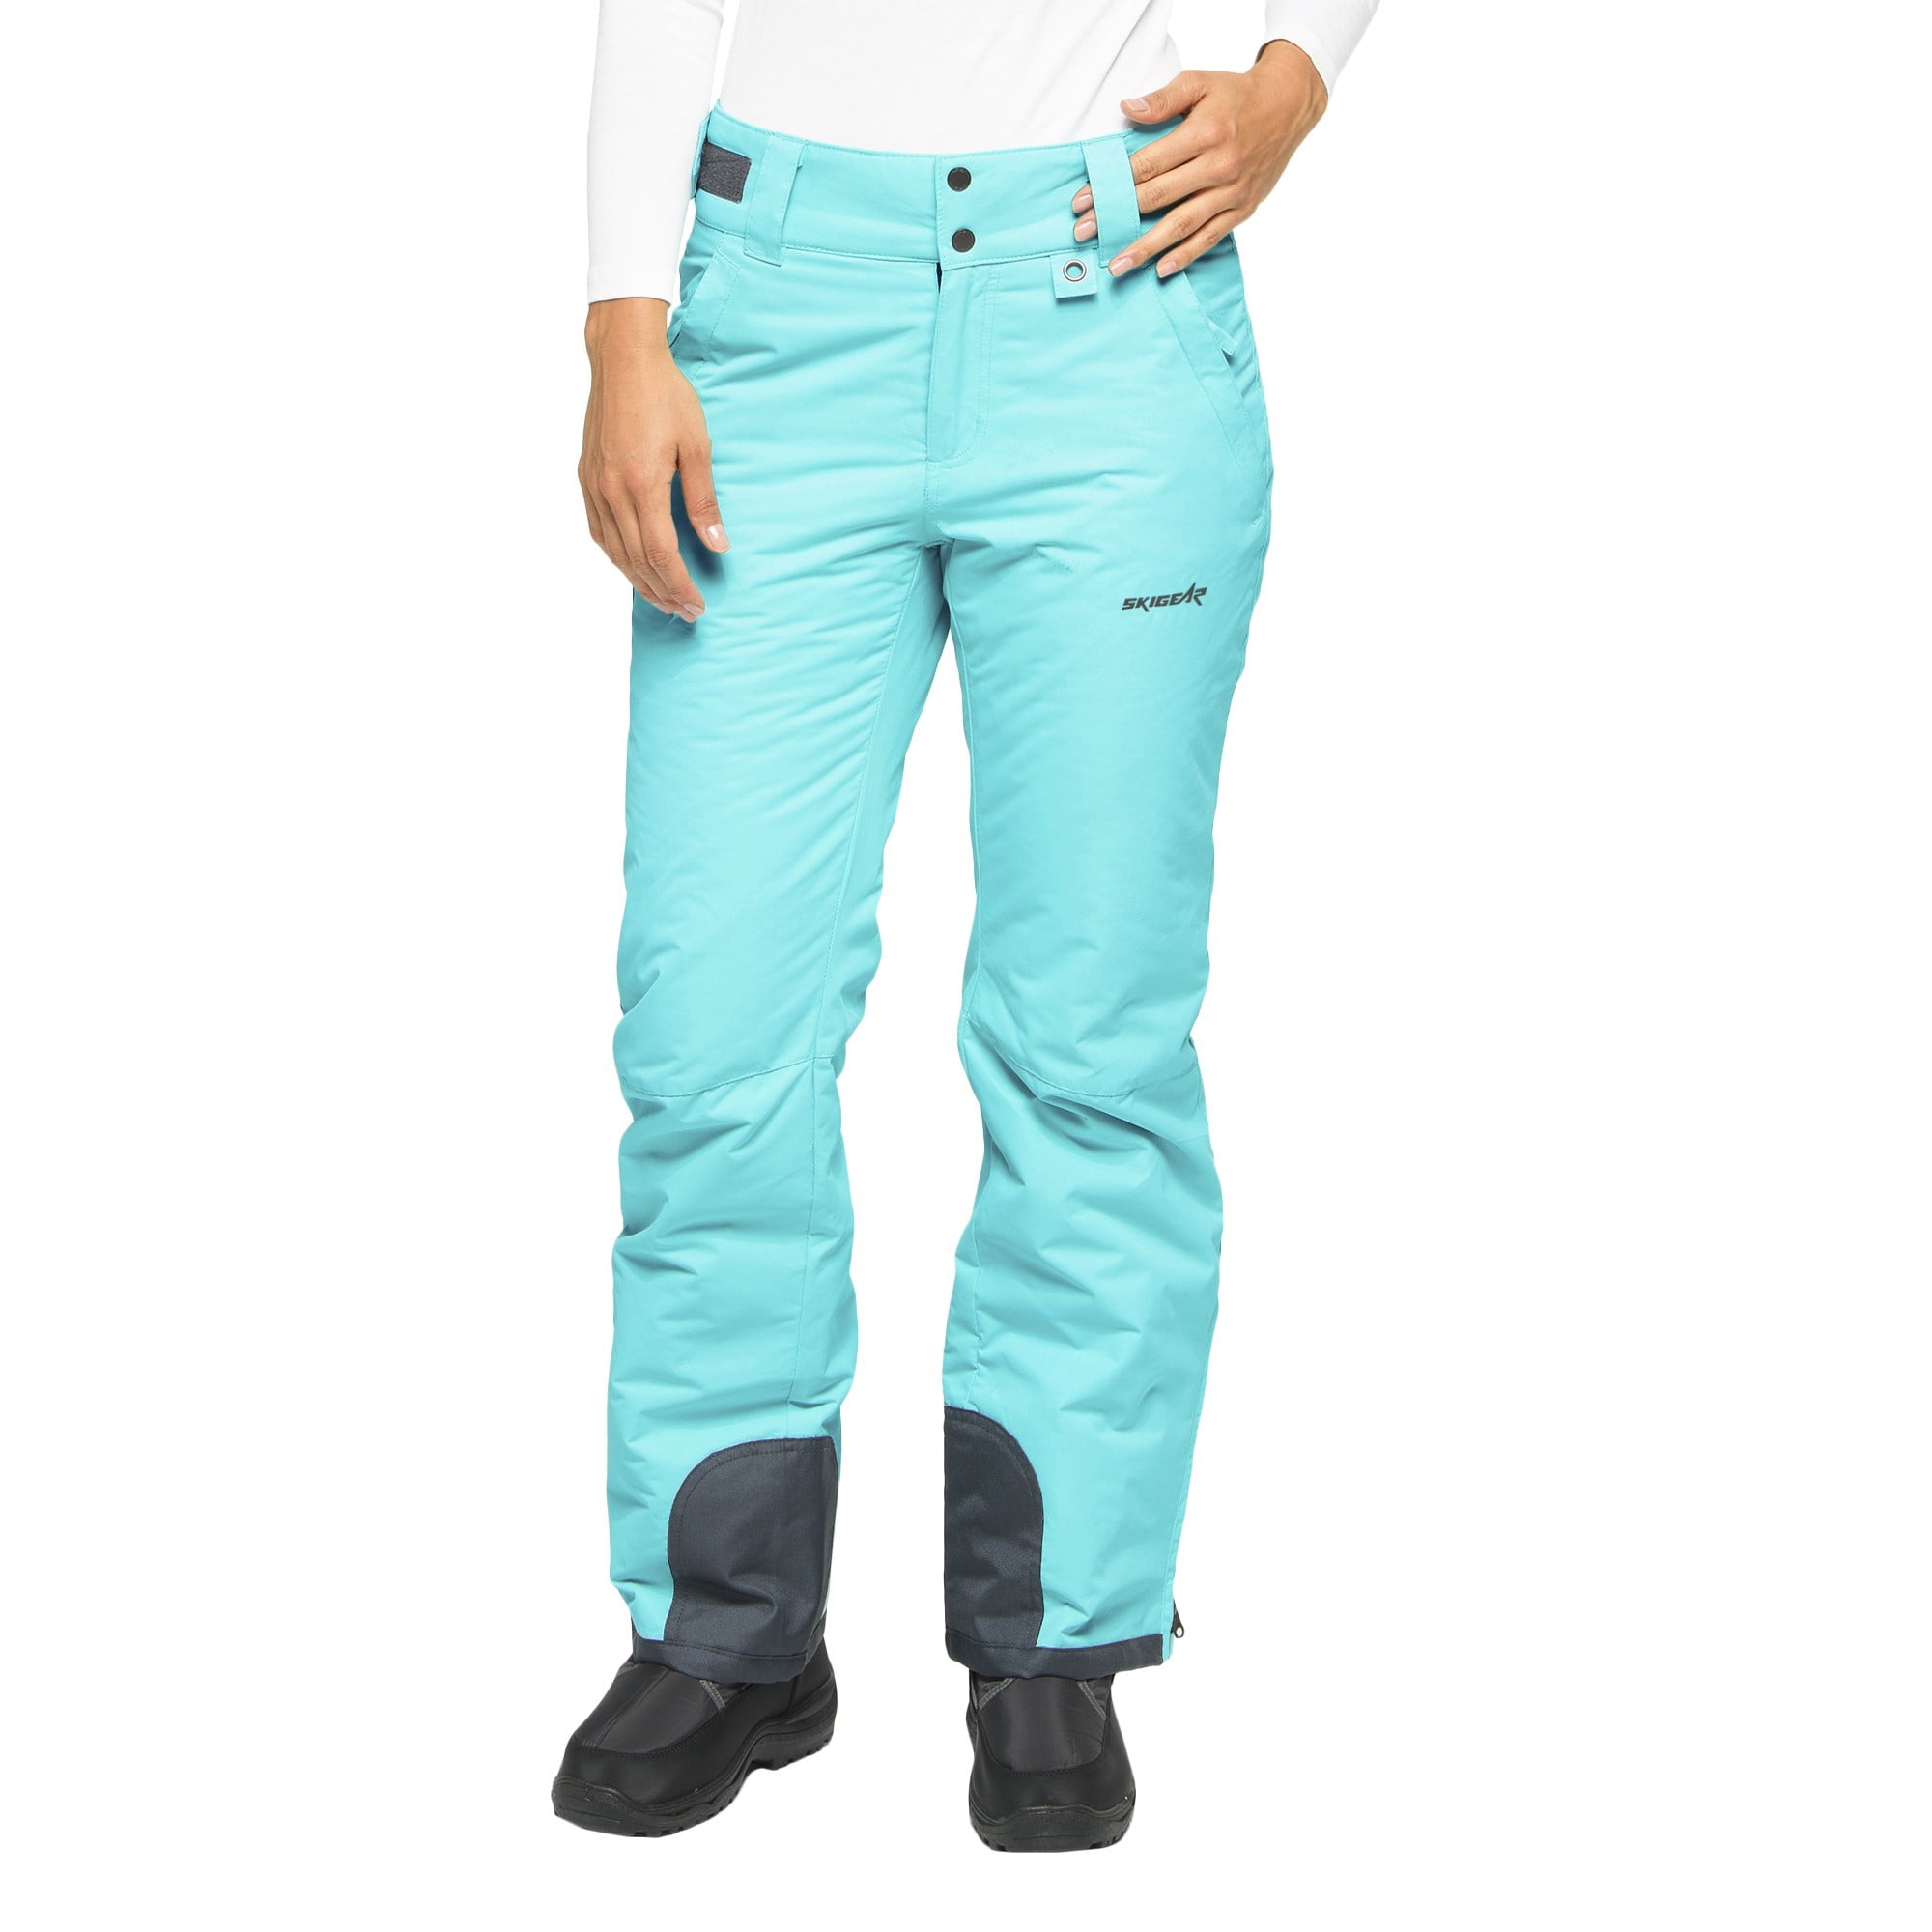 SkiGear by Arctix Women's and Plus Size Insulated Snow Pant 